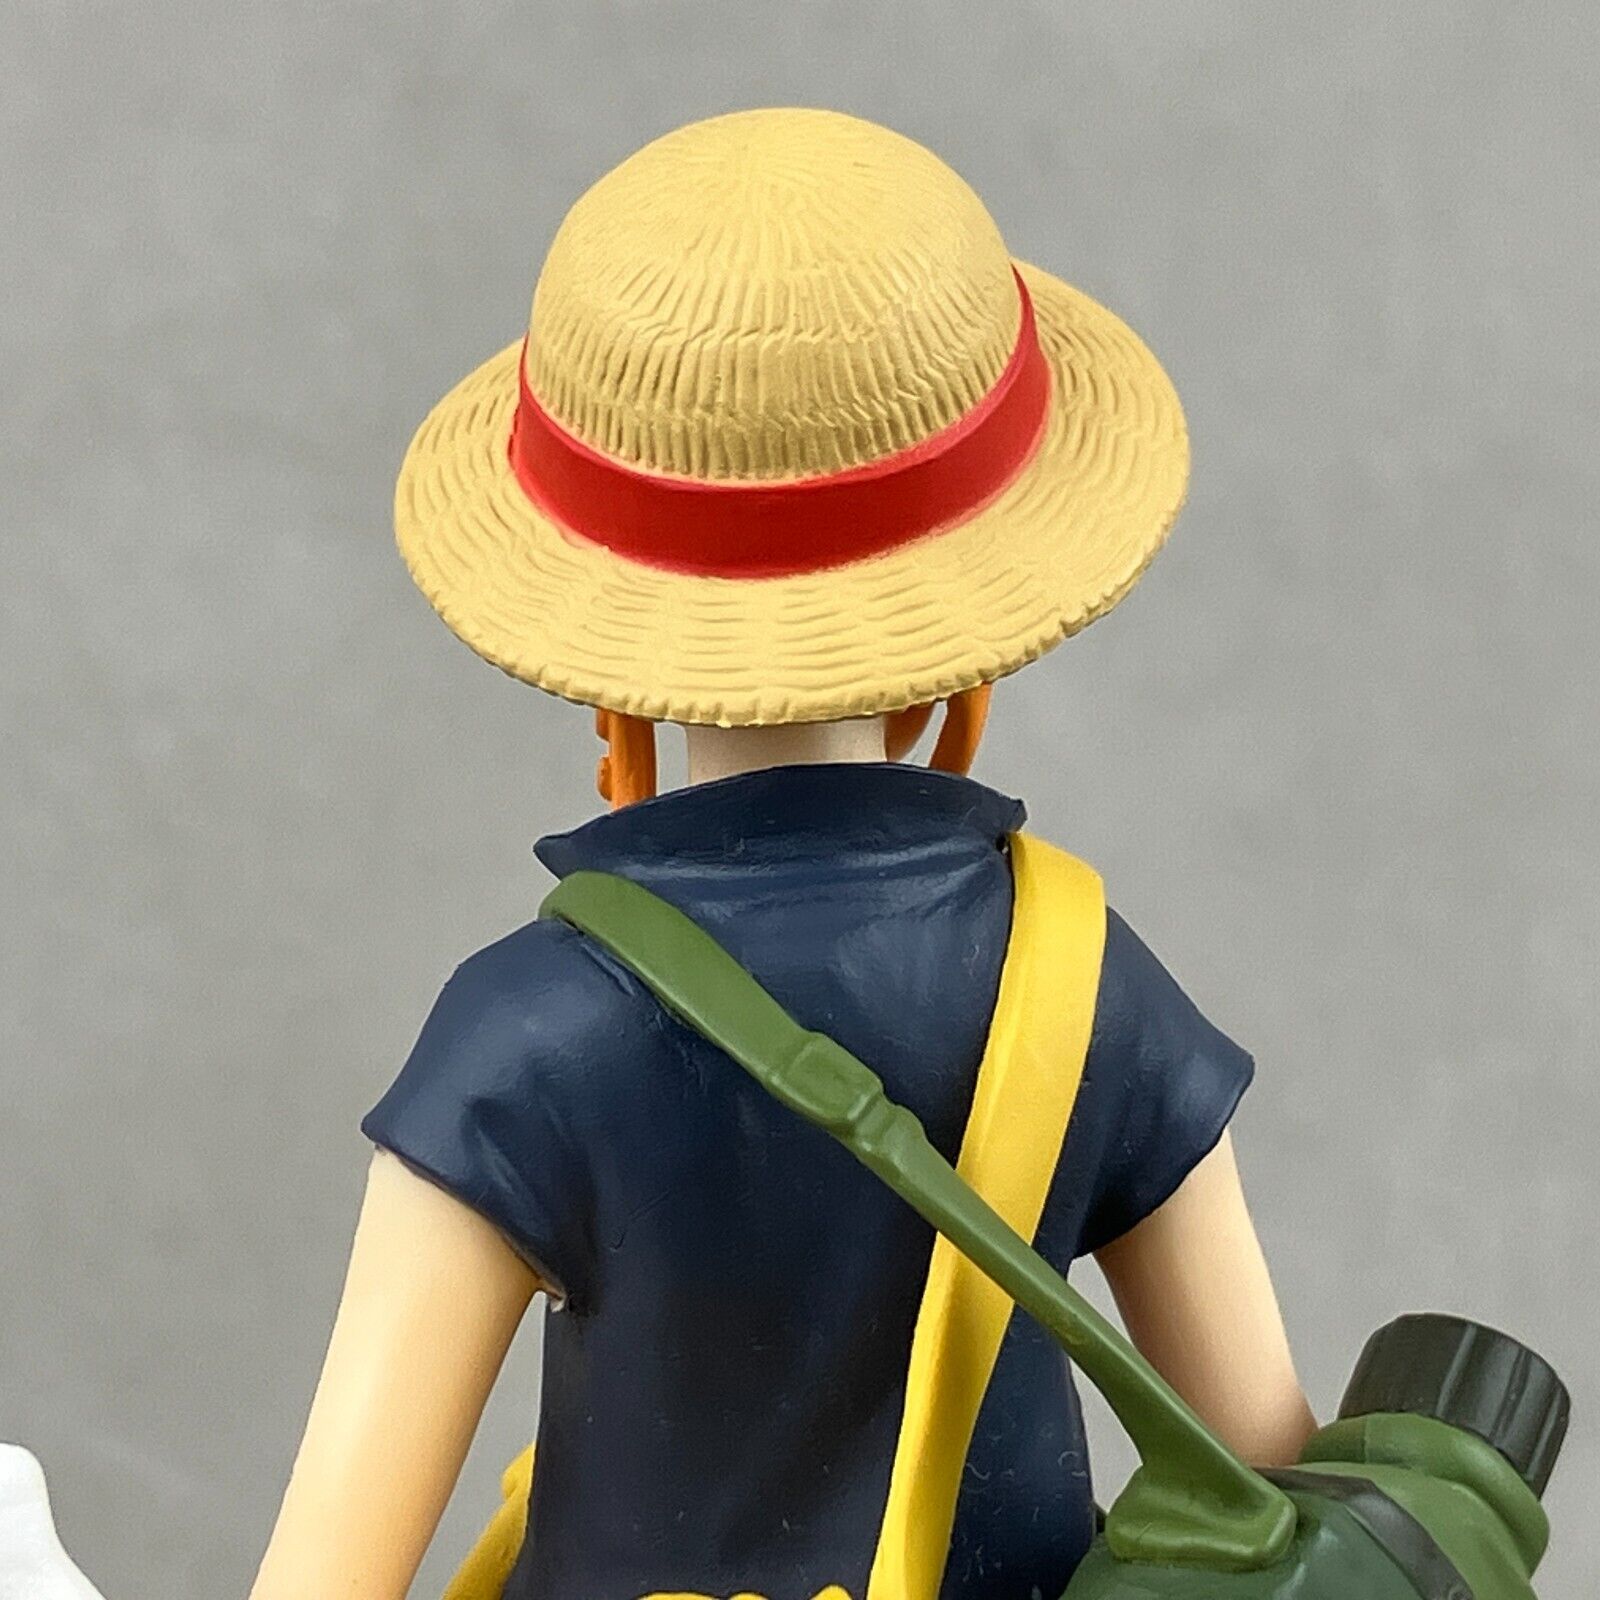 Bandai One Piece Monkey D. Luffy Locations Strong World Anime Figure